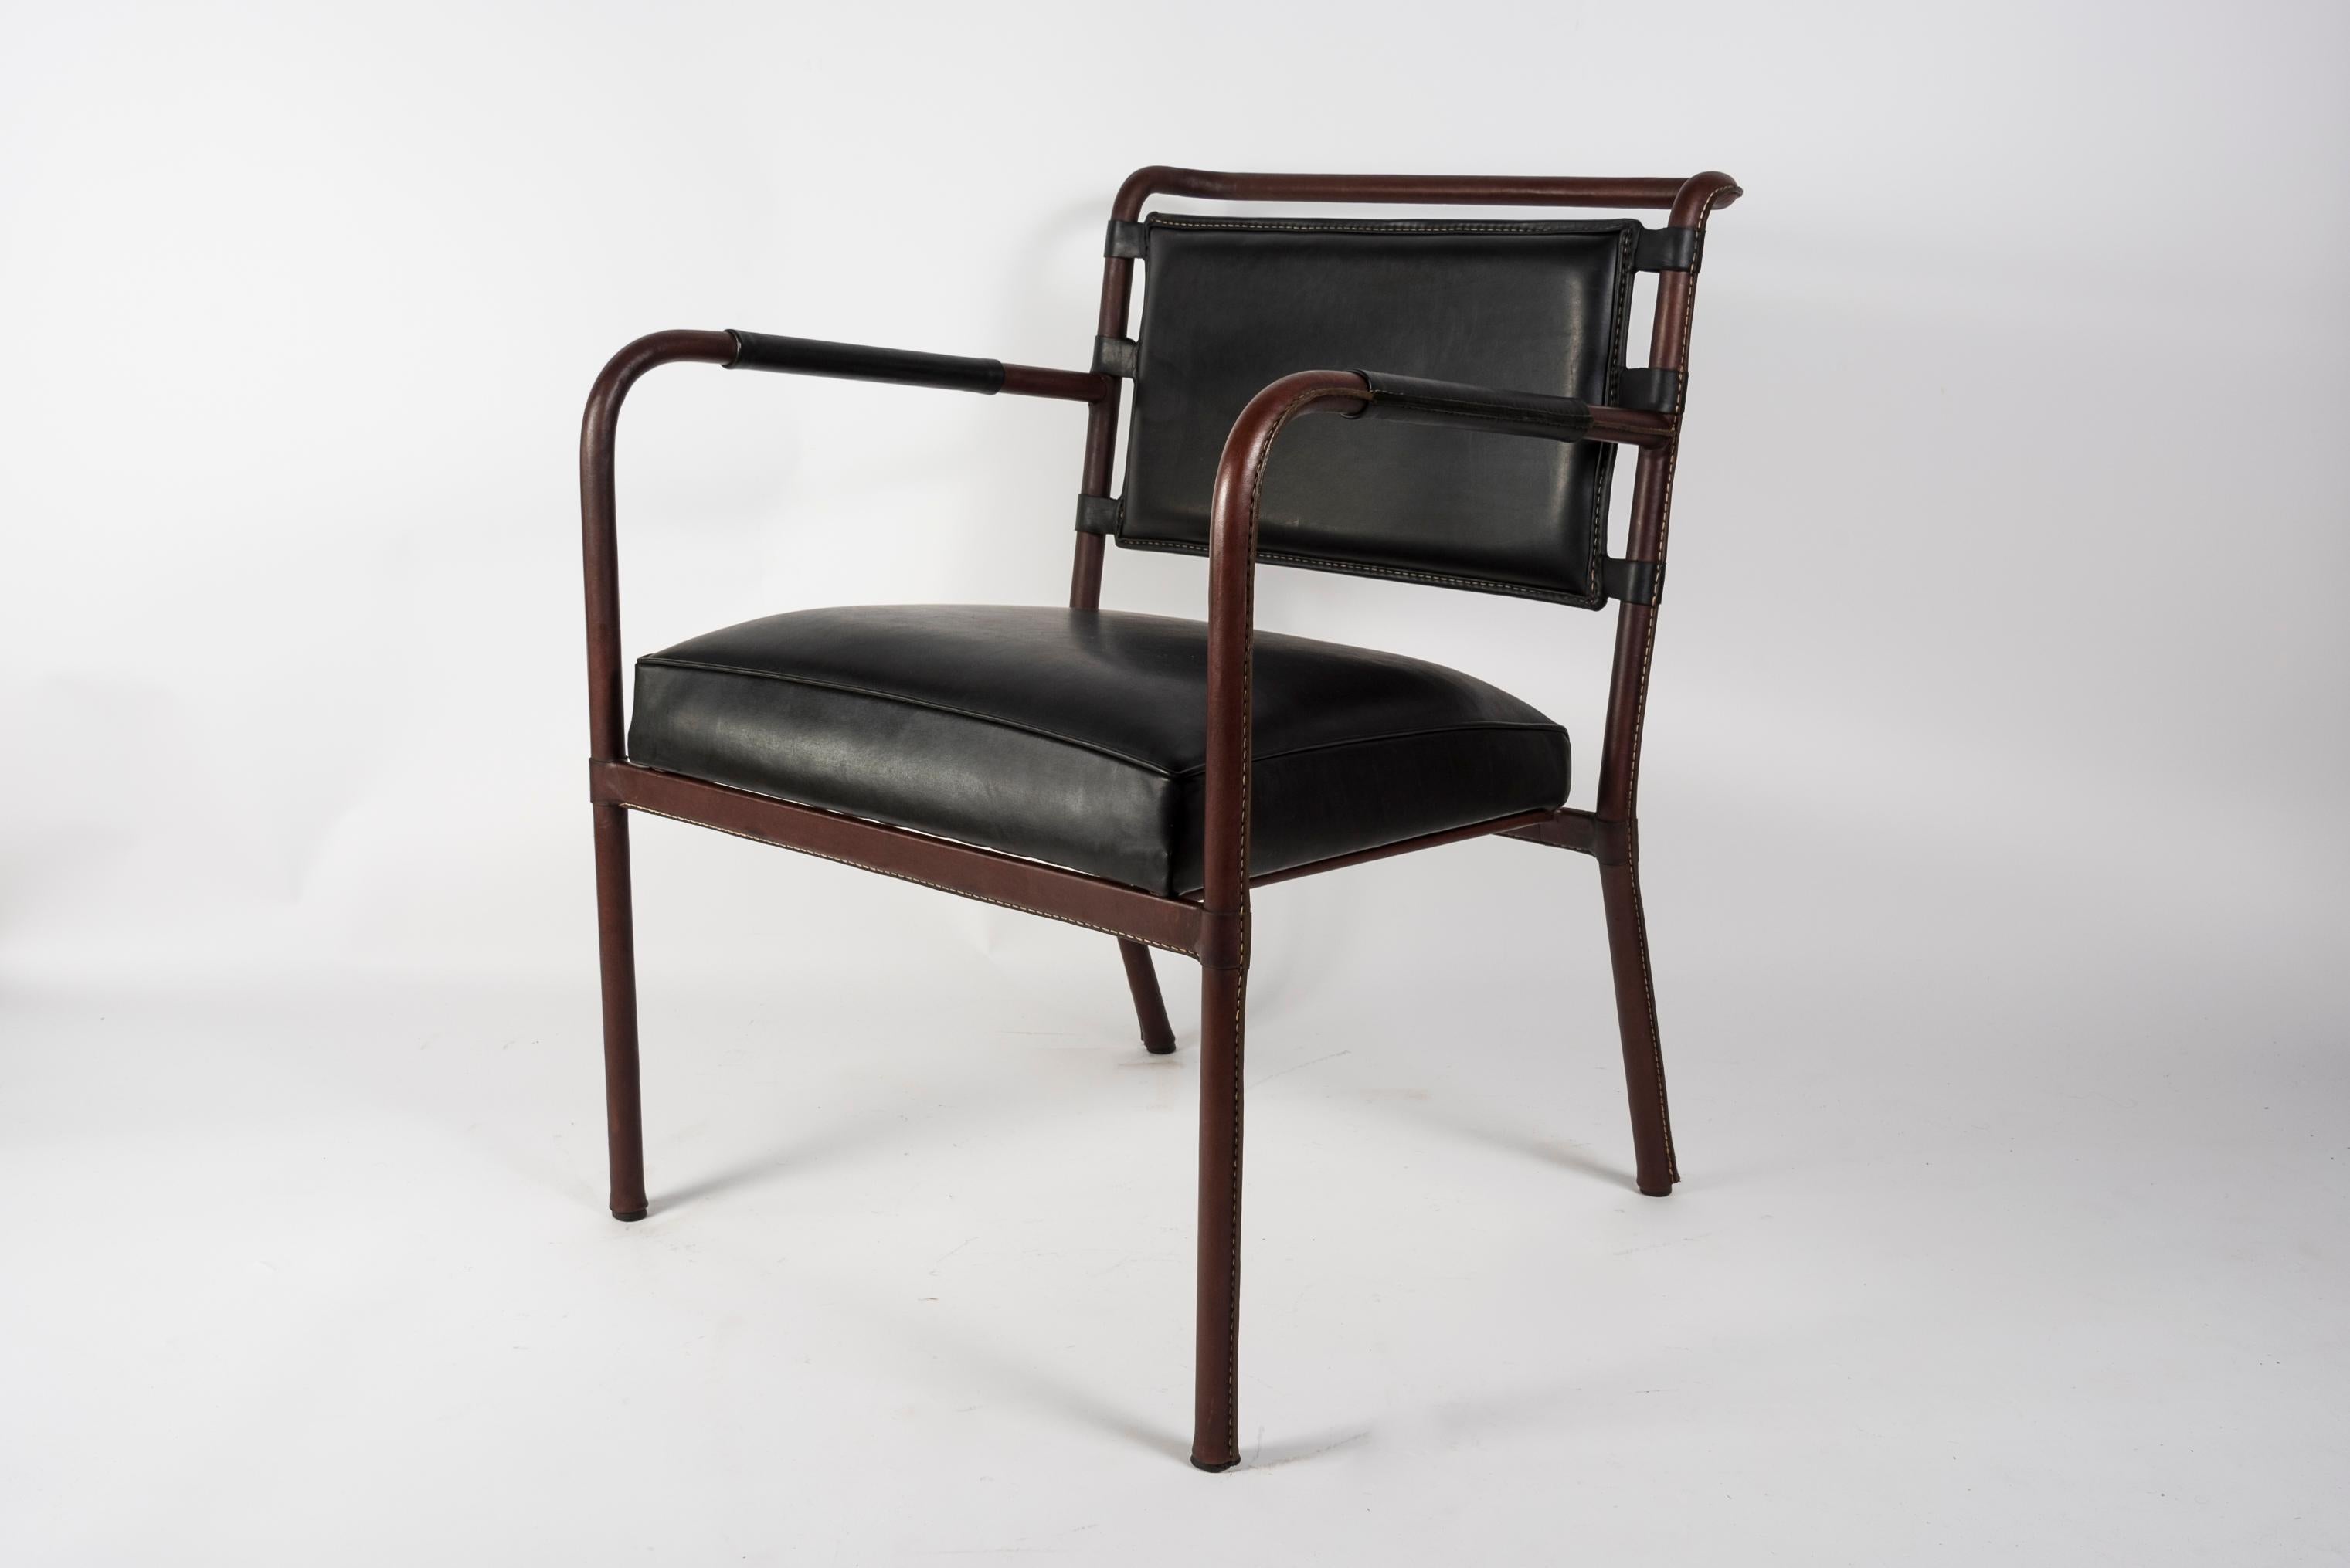 French 1950's Stitched Leather armchair by Jacques adnet For Sale